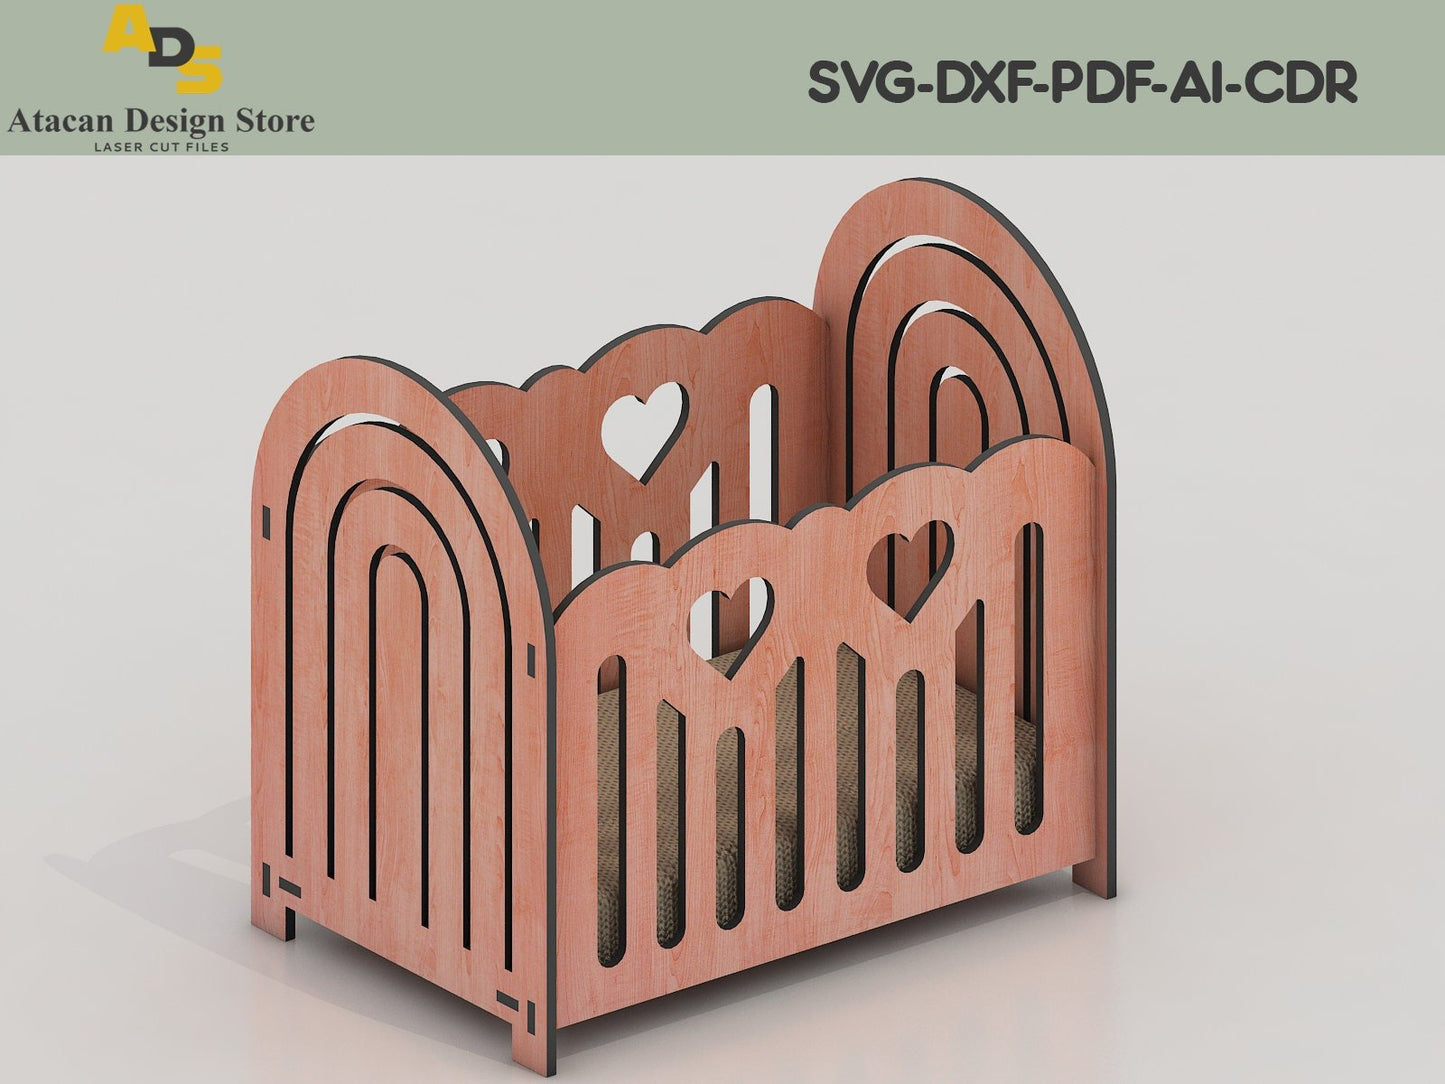 Baby cradle laser cut SVG files for glowforge / Baby Crib Svg, Dxf laser cnc templates / Digital vector download ADS102